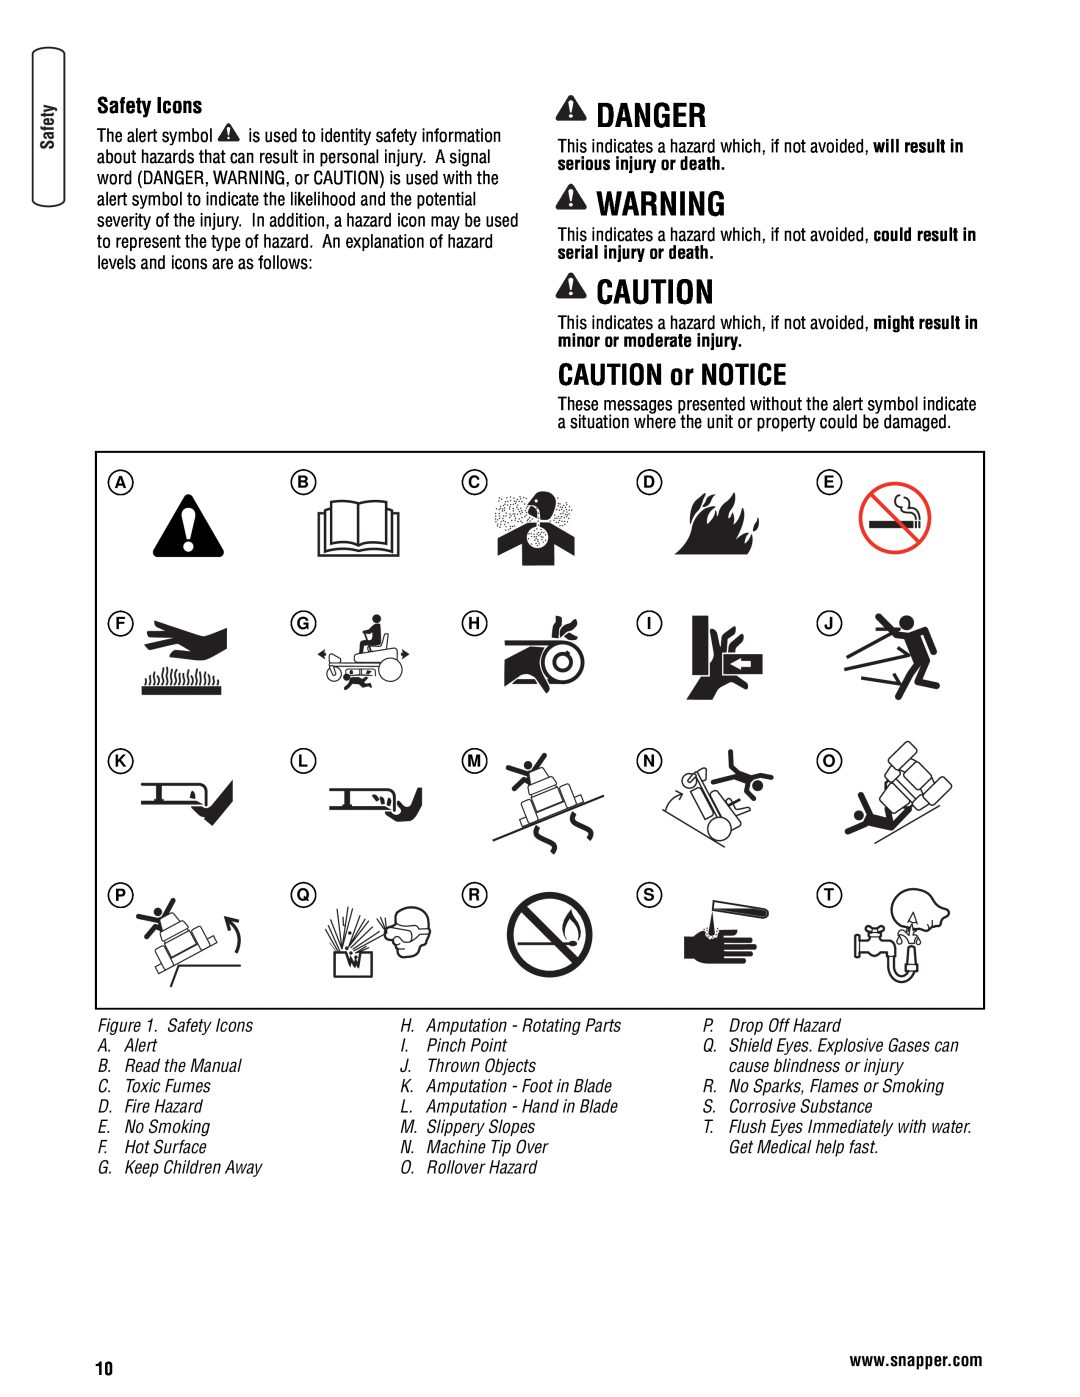 Snapper 355Z Danger, CAUTION or NOTICE, Abcde, Klm No Pqrst, Safety Icons, Amputation - Rotating Parts, Drop Off Hazard 